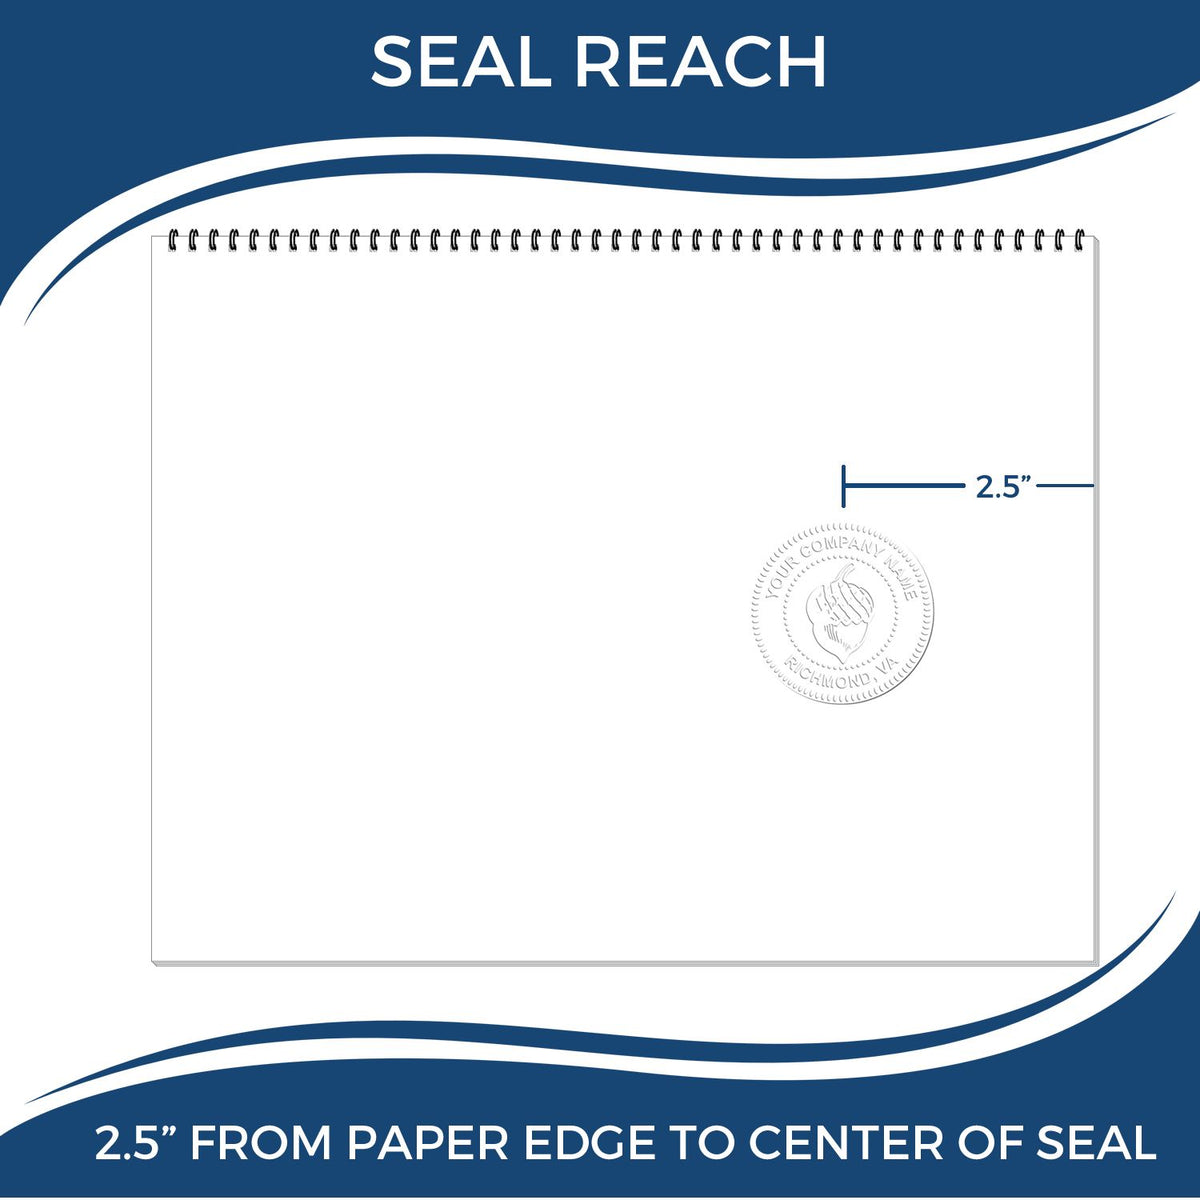 An infographic showing the seal reach which is represented by a ruler and a miniature seal image of the Long Reach District of Columbia Land Surveyor Seal